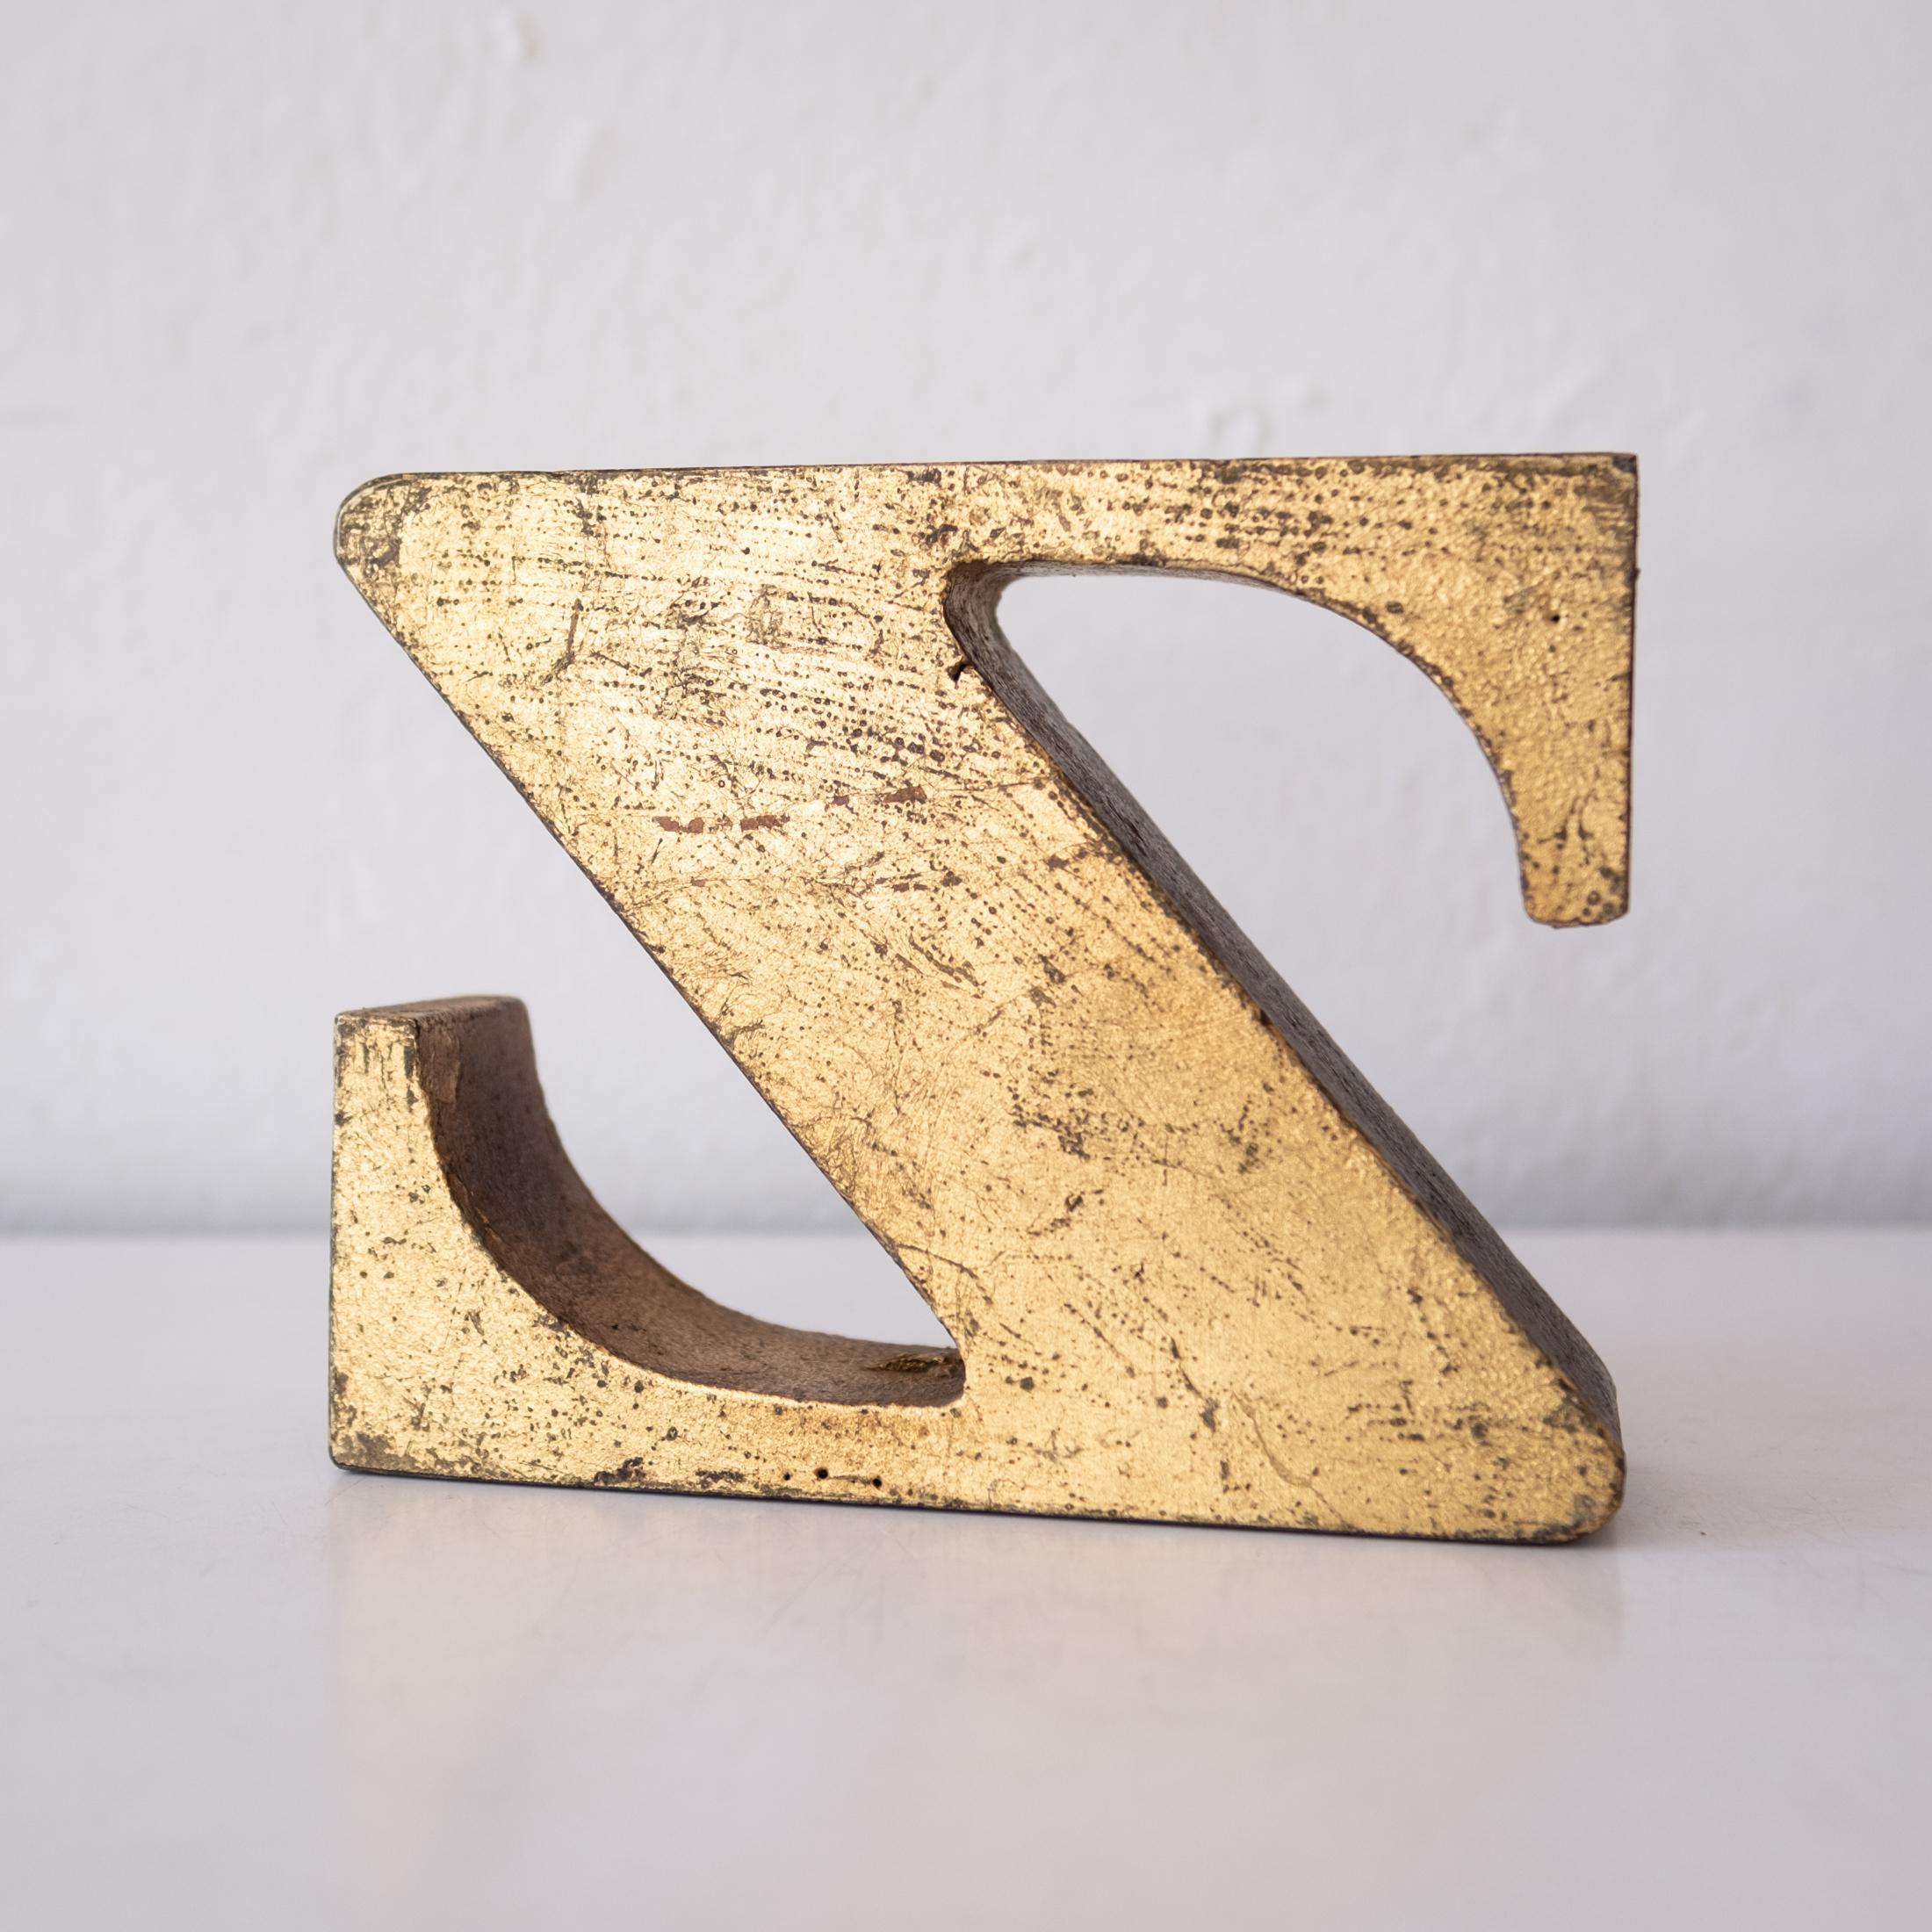 Z Bookend by Curtis Jere Signed & Dated 1971 in Gold Leaf Finish In Good Condition For Sale In San Diego, CA